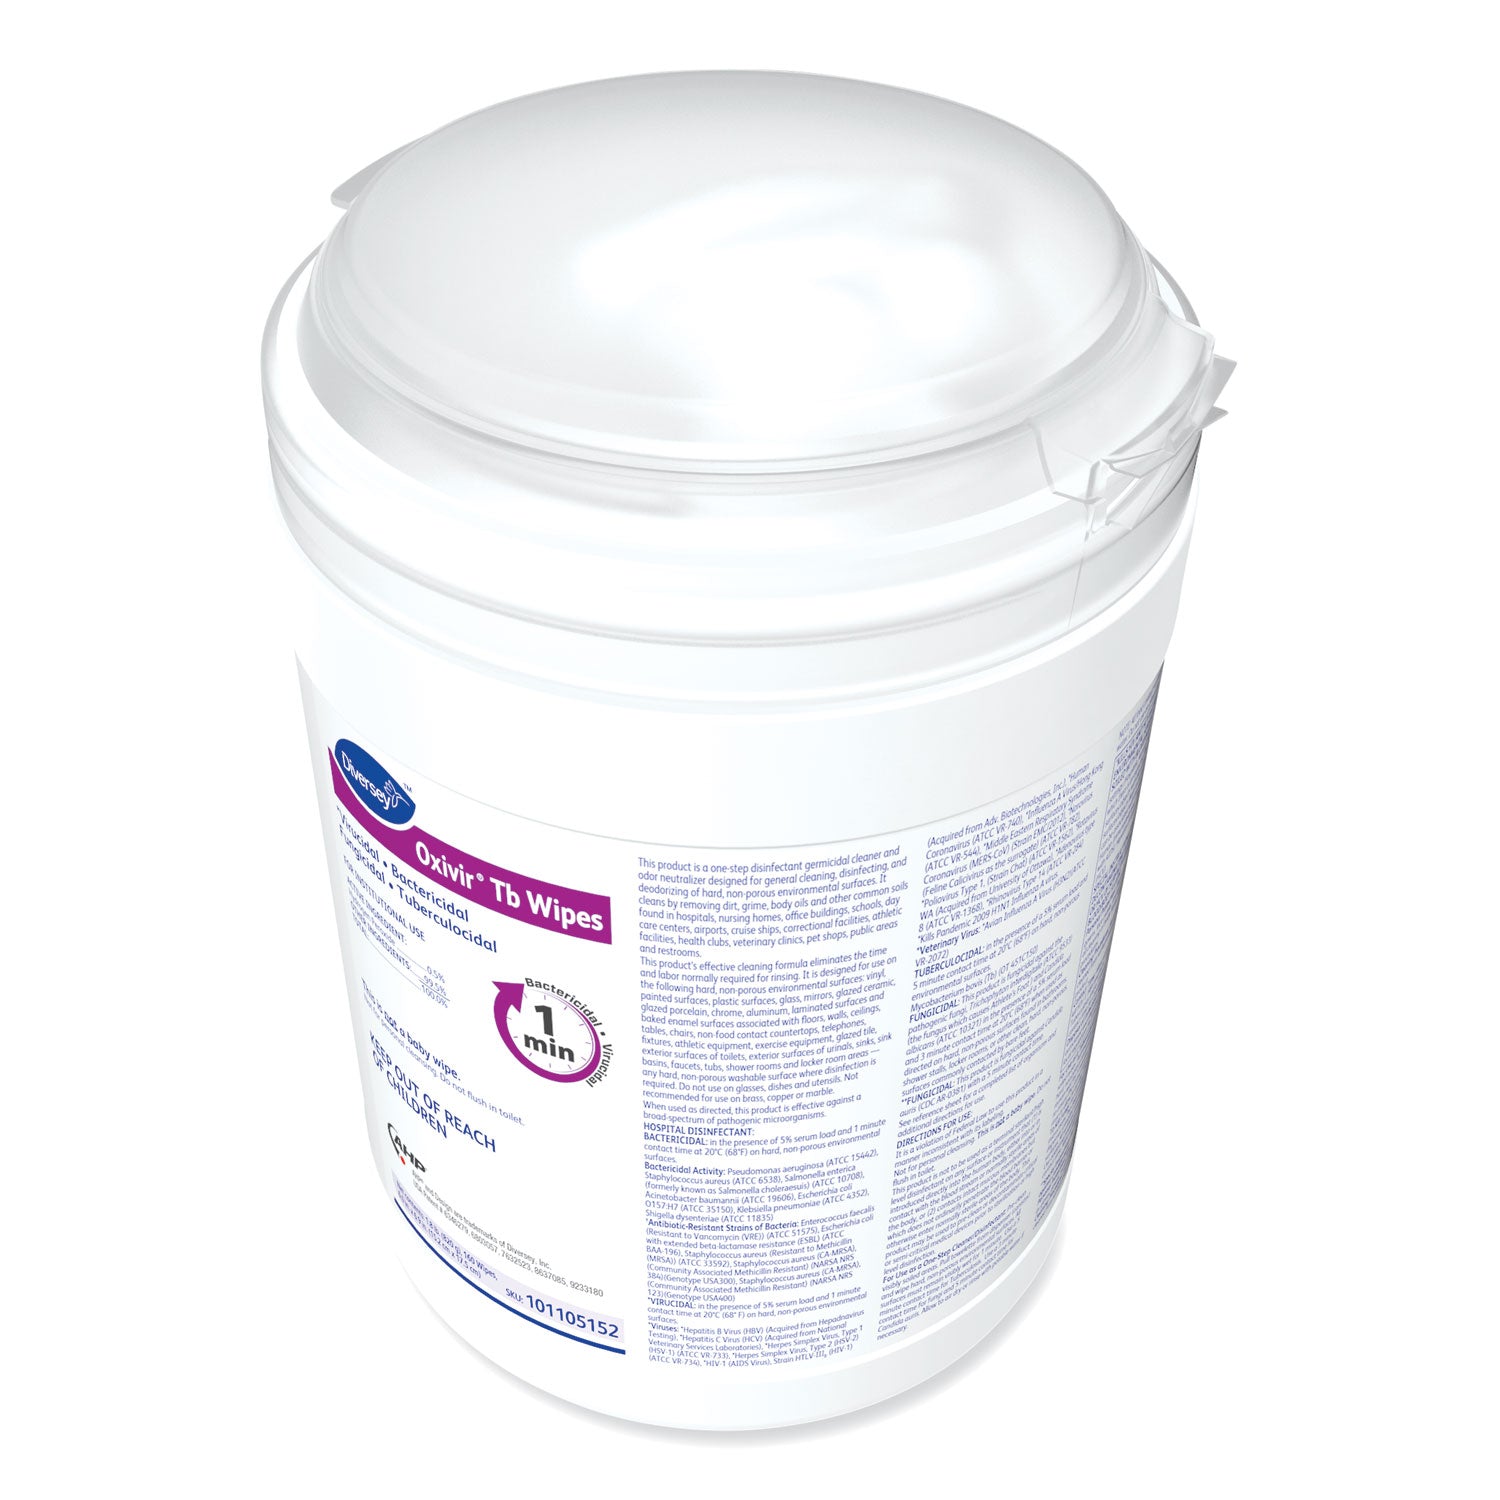 oxivir-tb-disinfectant-wipes-6-x-69-characteristic-scent-white-160-canister-4-canisters-carton_dvo101105152 - 6